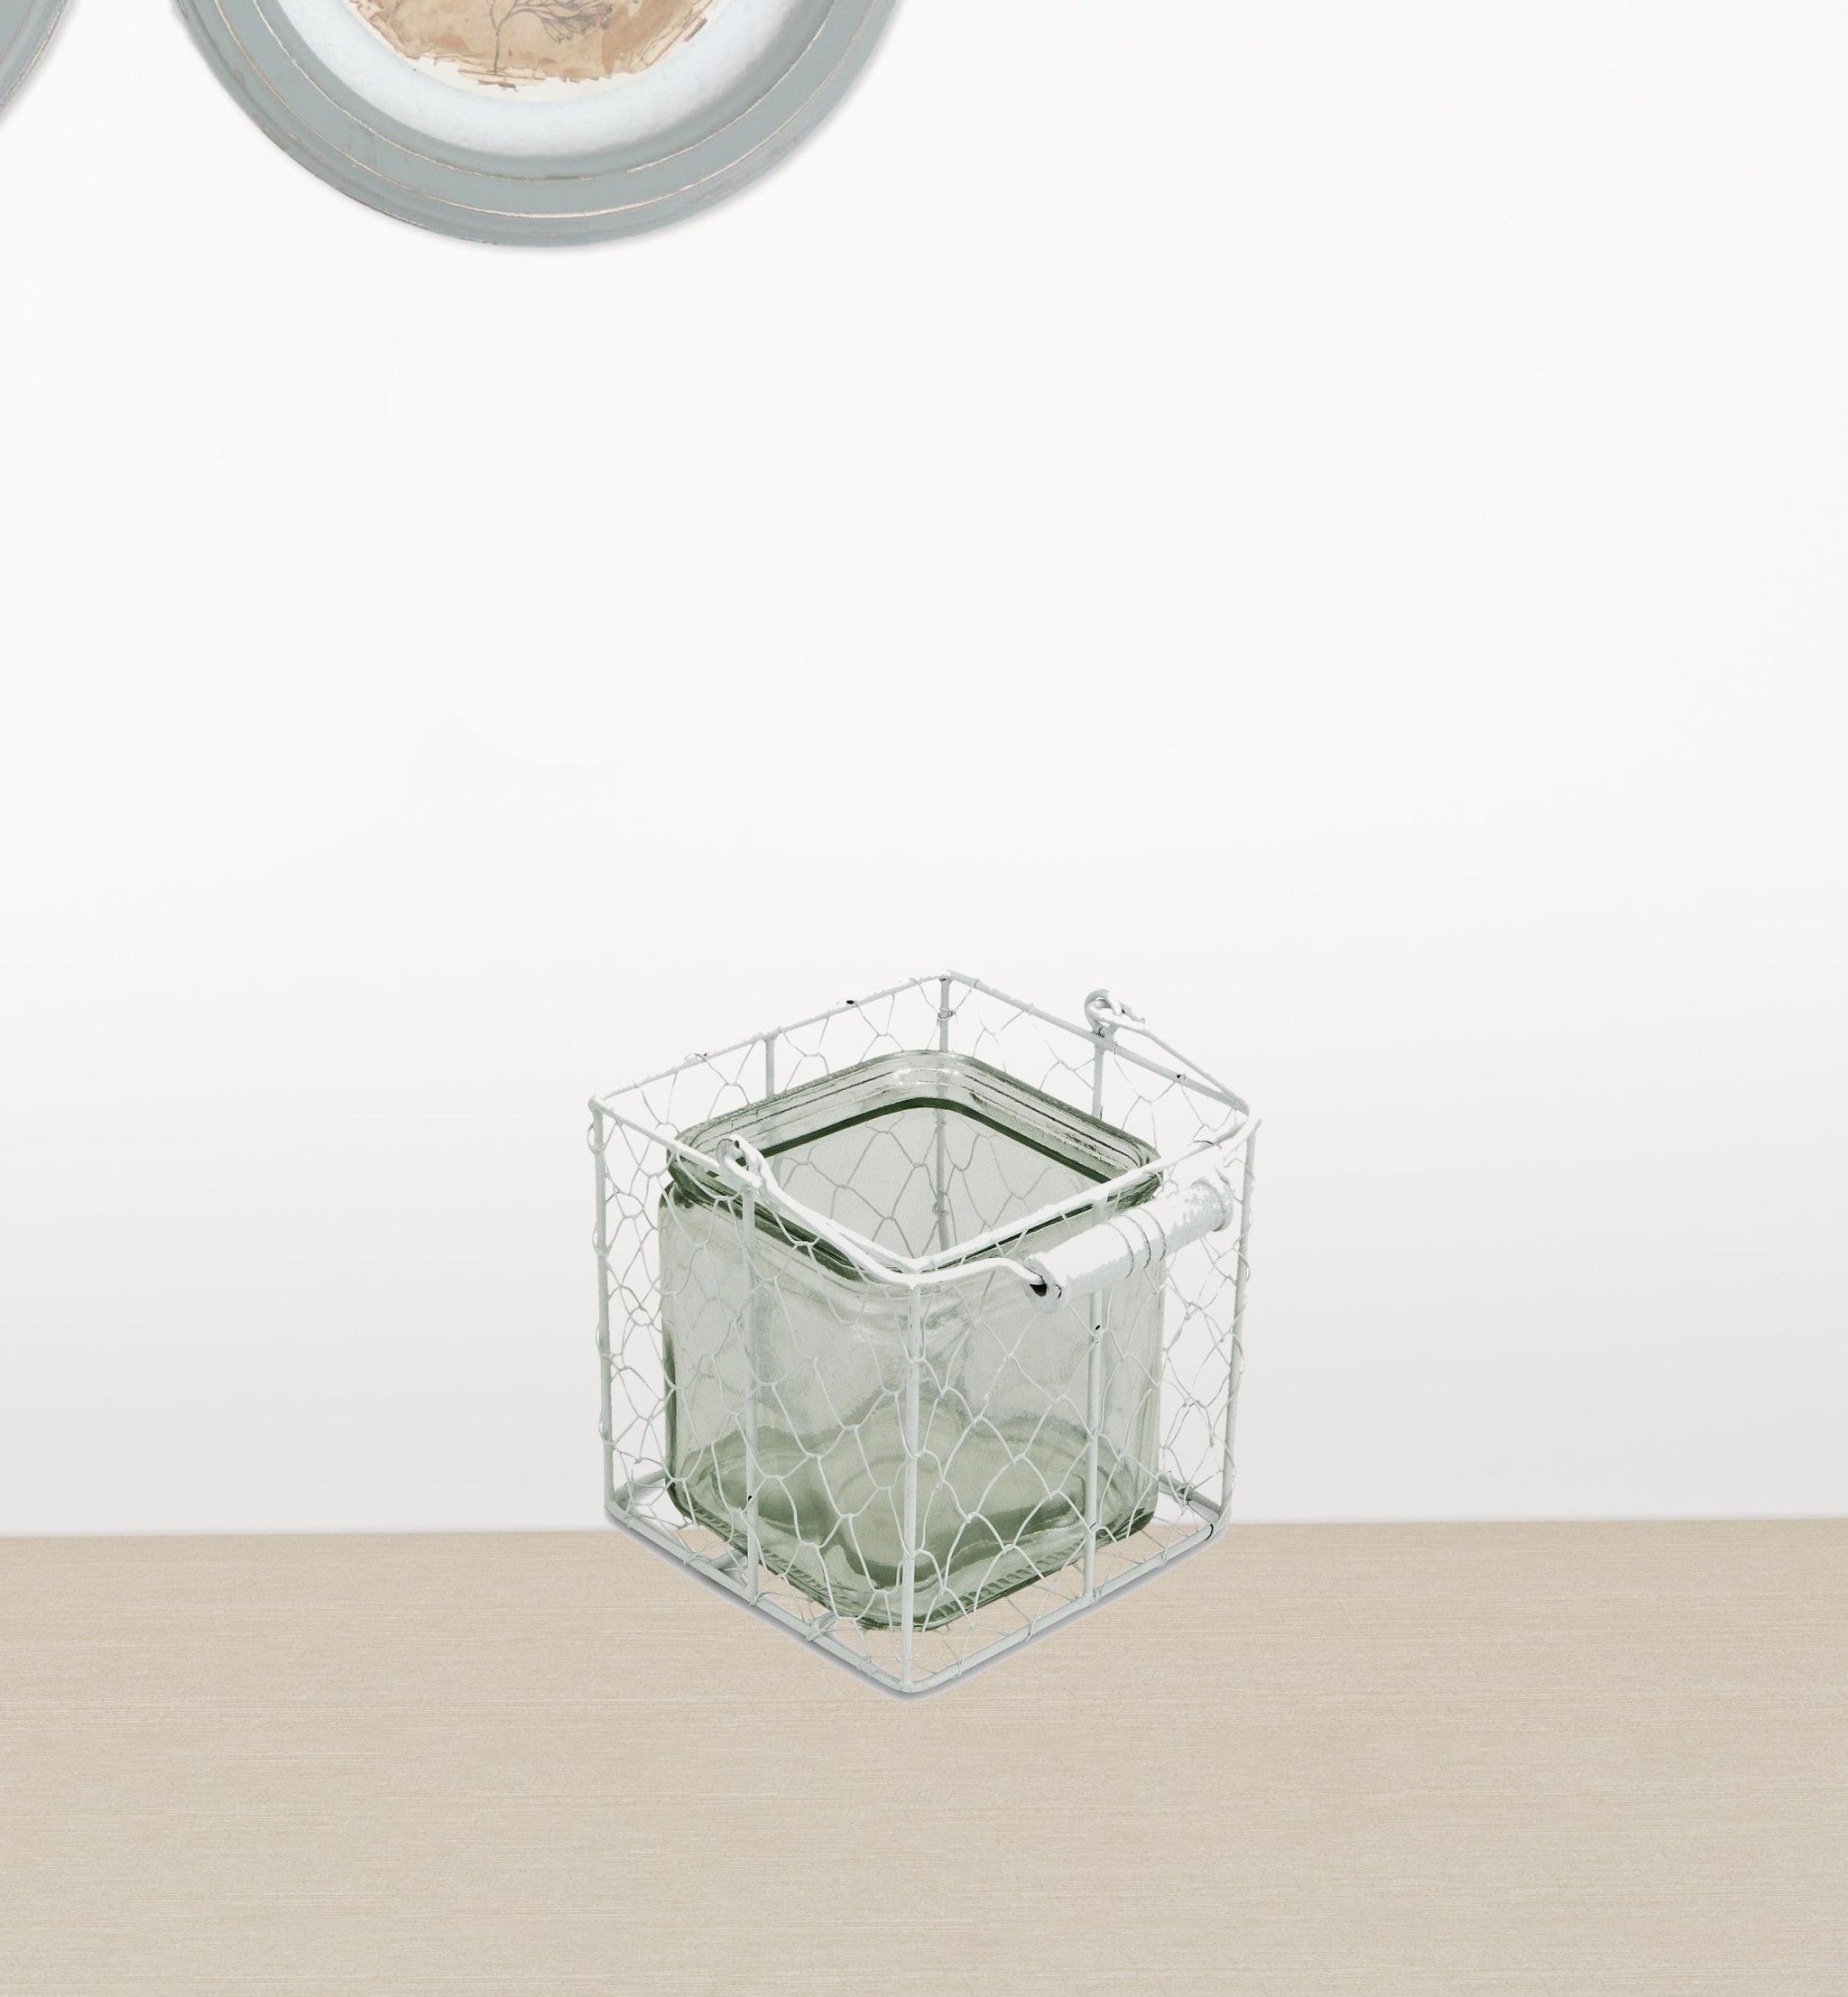 5.5" White and Clear Wire Basket Glass Jar